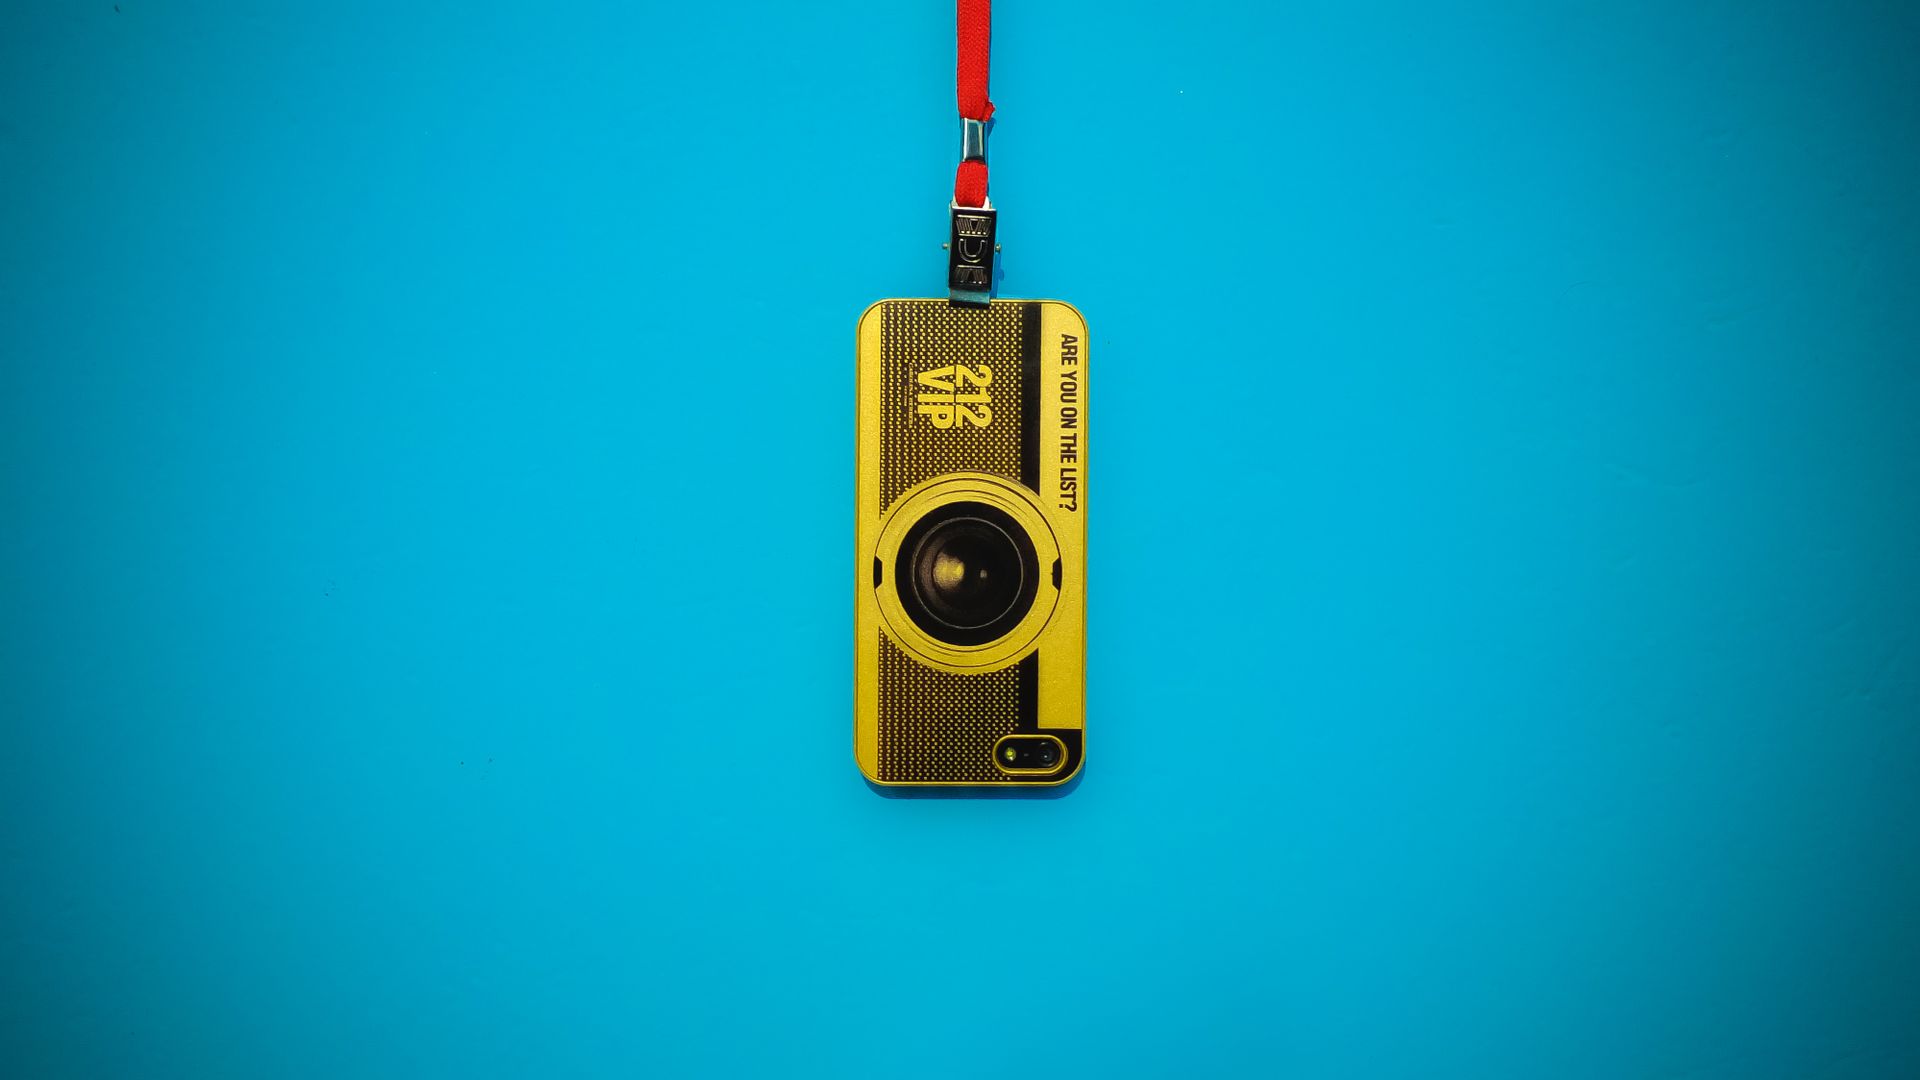 Yellow 212 Vip Camera Hanging On Blue Wall - Feature Phone - HD Wallpaper 